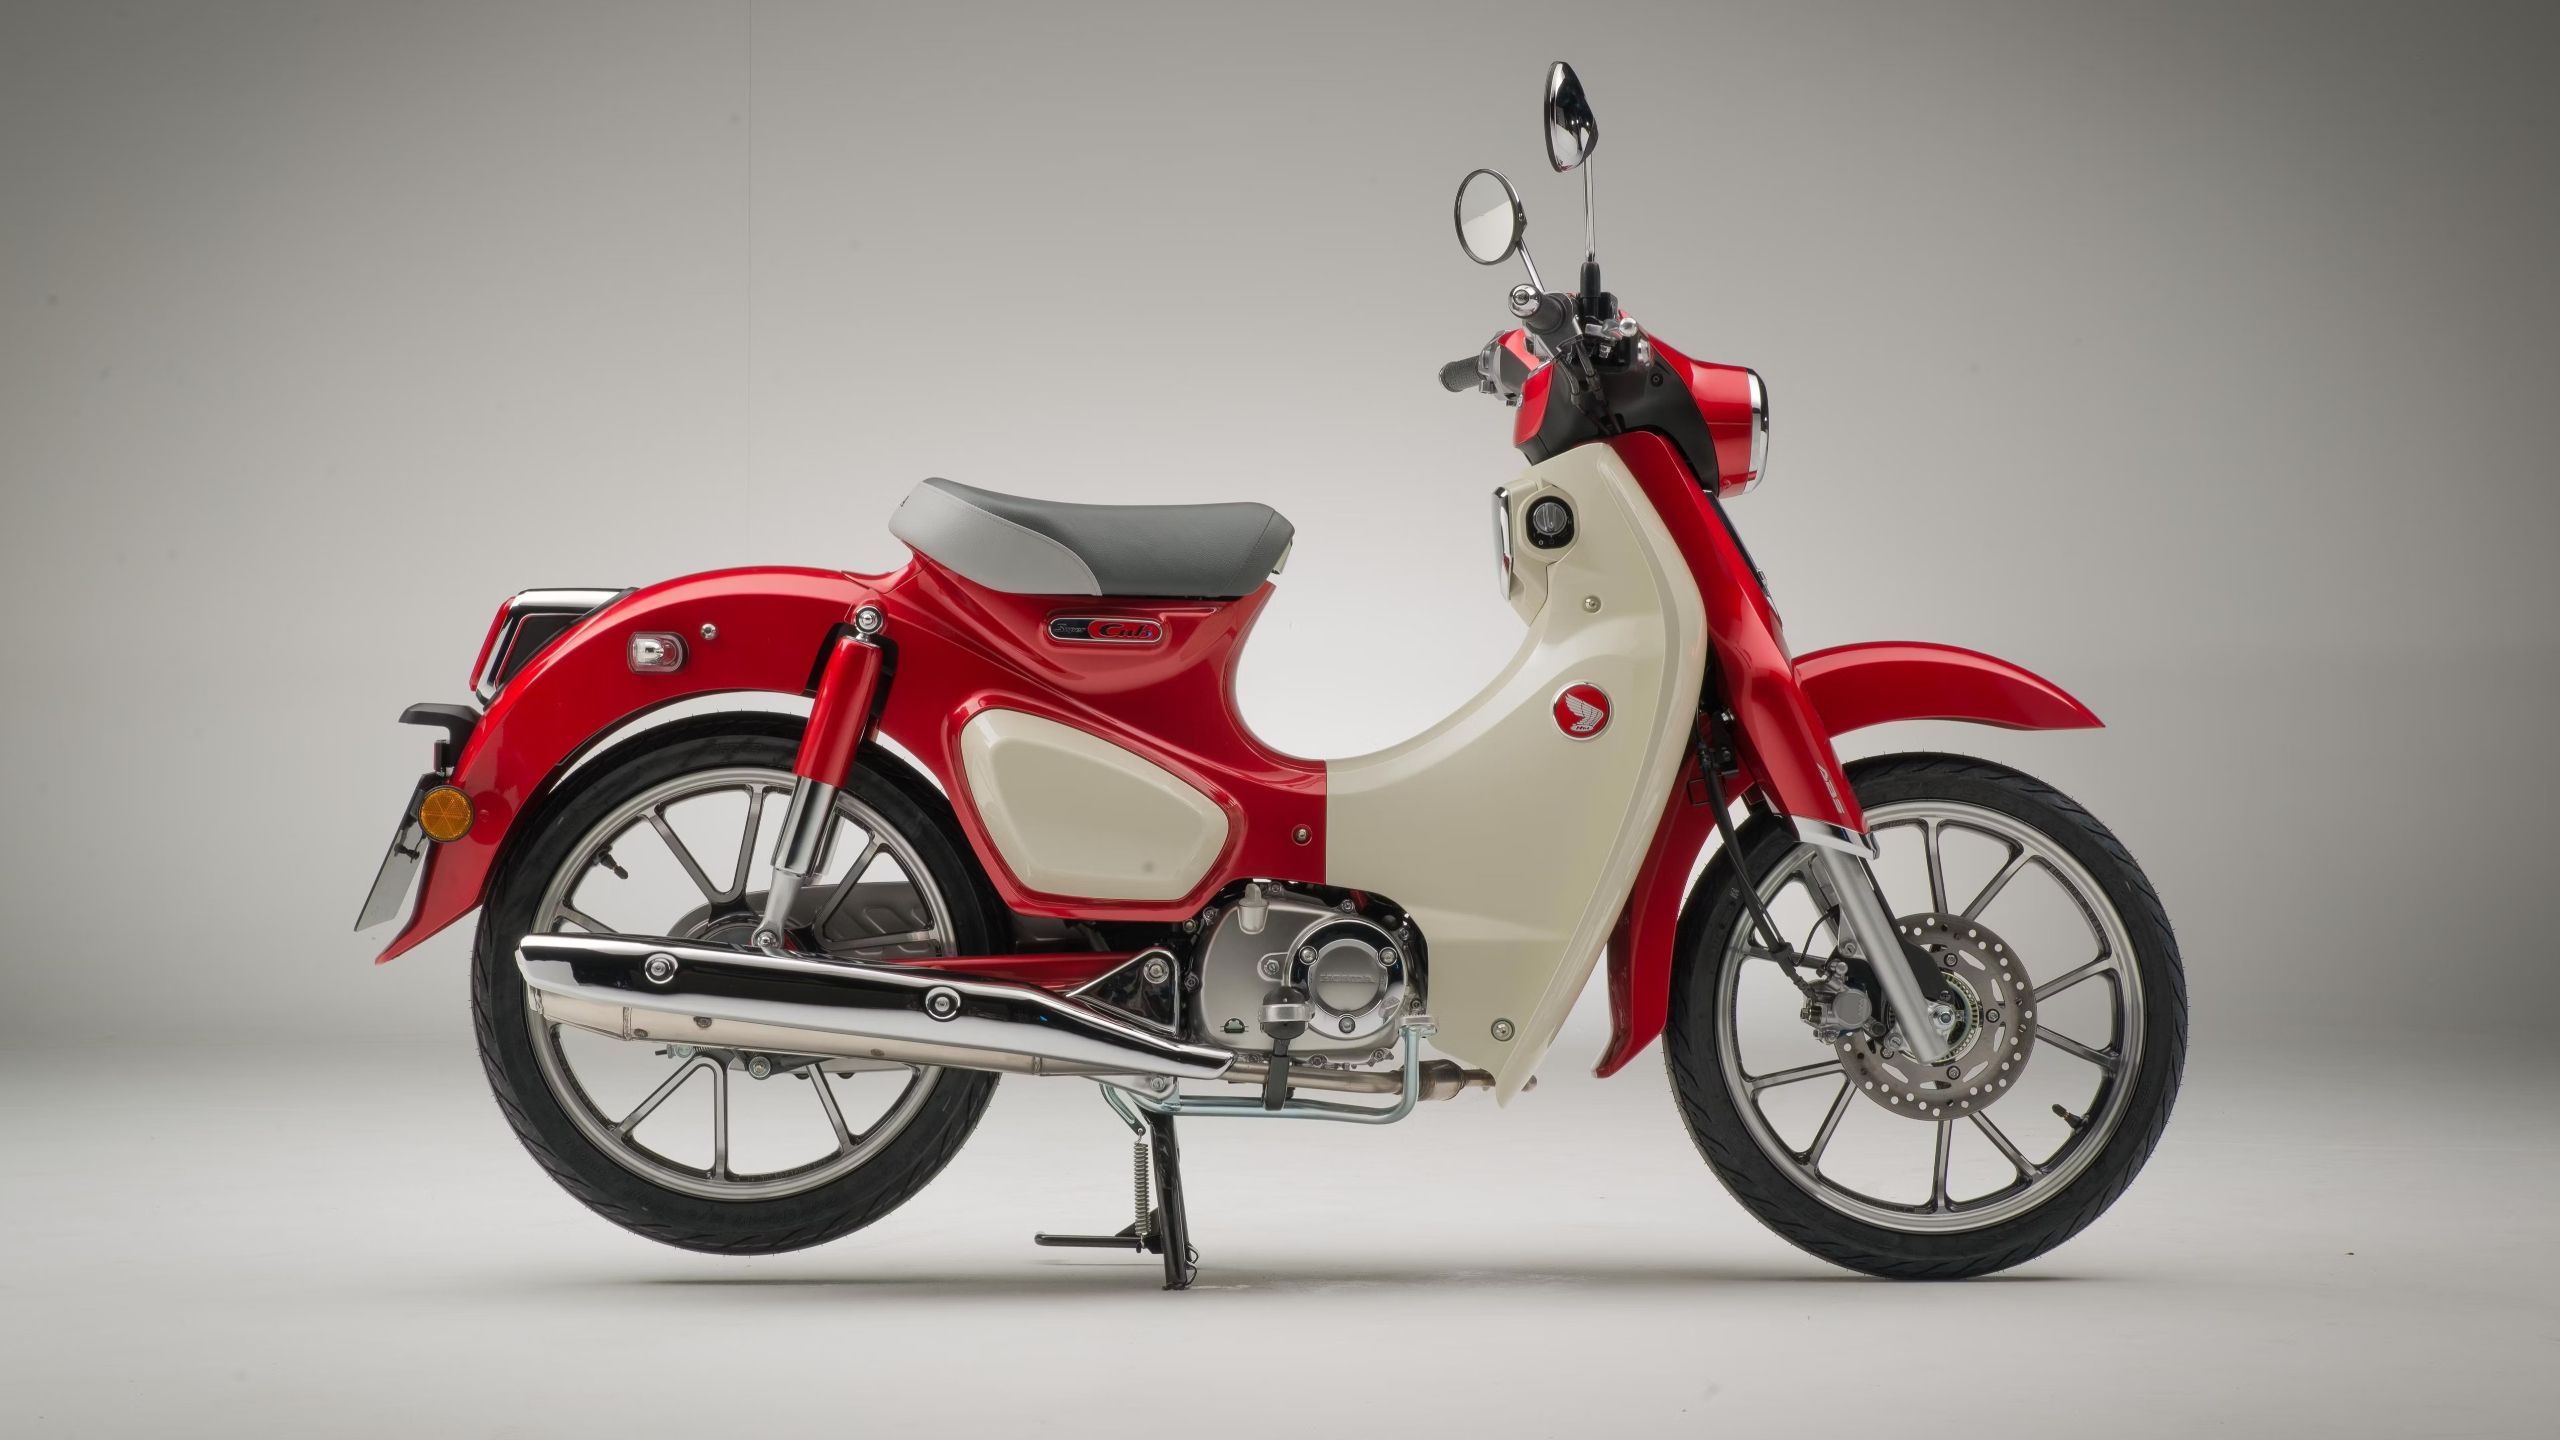 Honda Super Cub C125 red and white moped